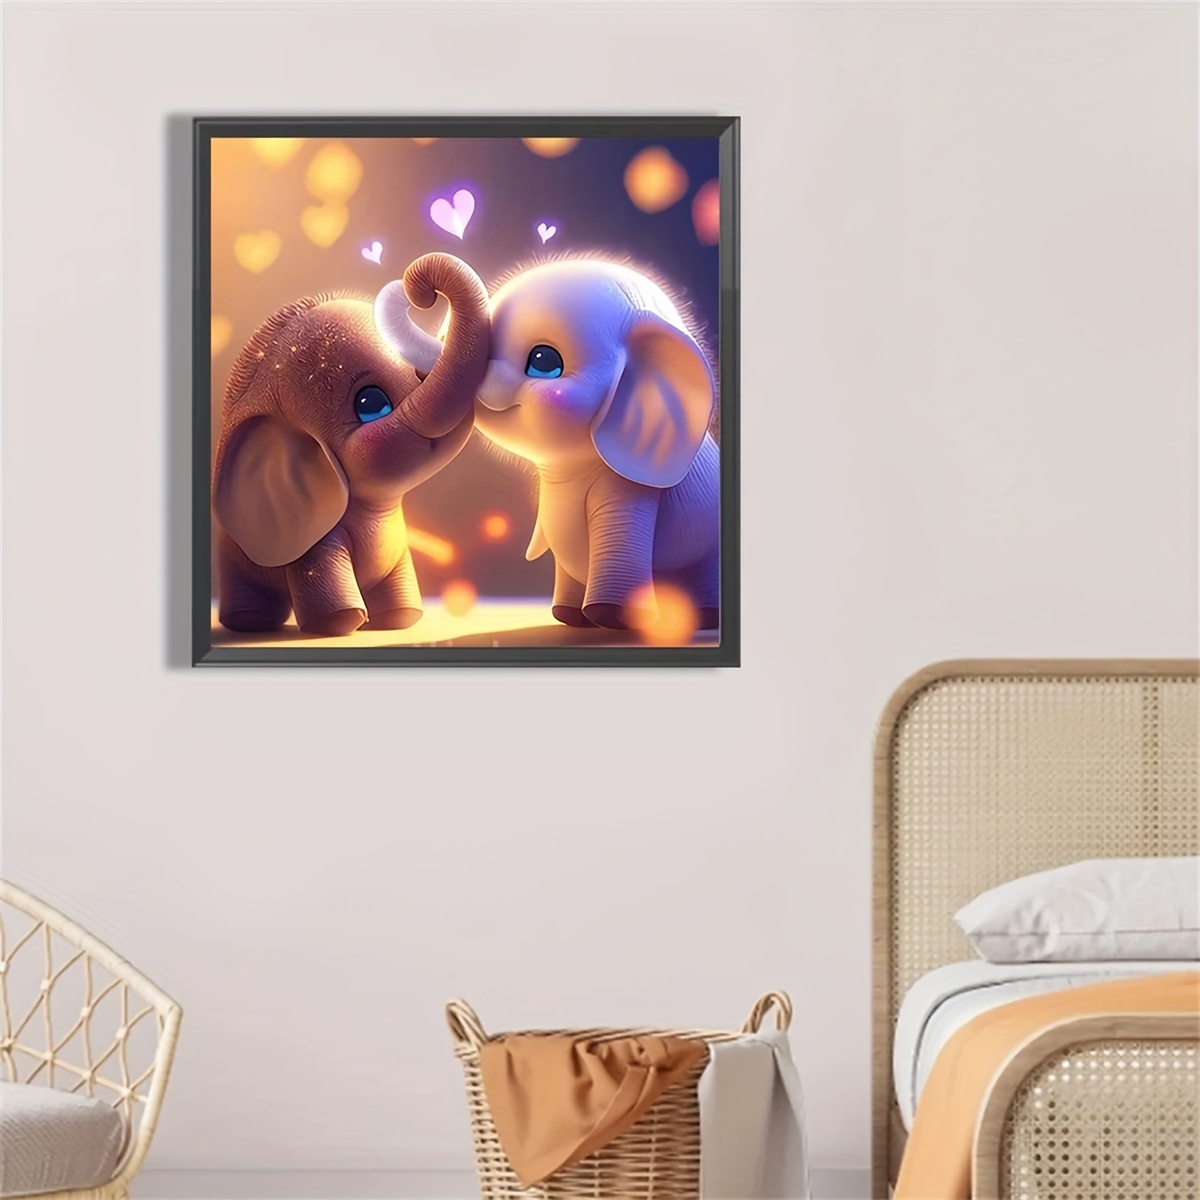 1pc 5d Full Diamond Beast Shaped Painting With 3d Effect For Living Room,  Study, Bedroom Decoration. Poster Does Not Include Frame - Size: 30*40 Cm.  Diy Art Family Fun Game Handmade Point